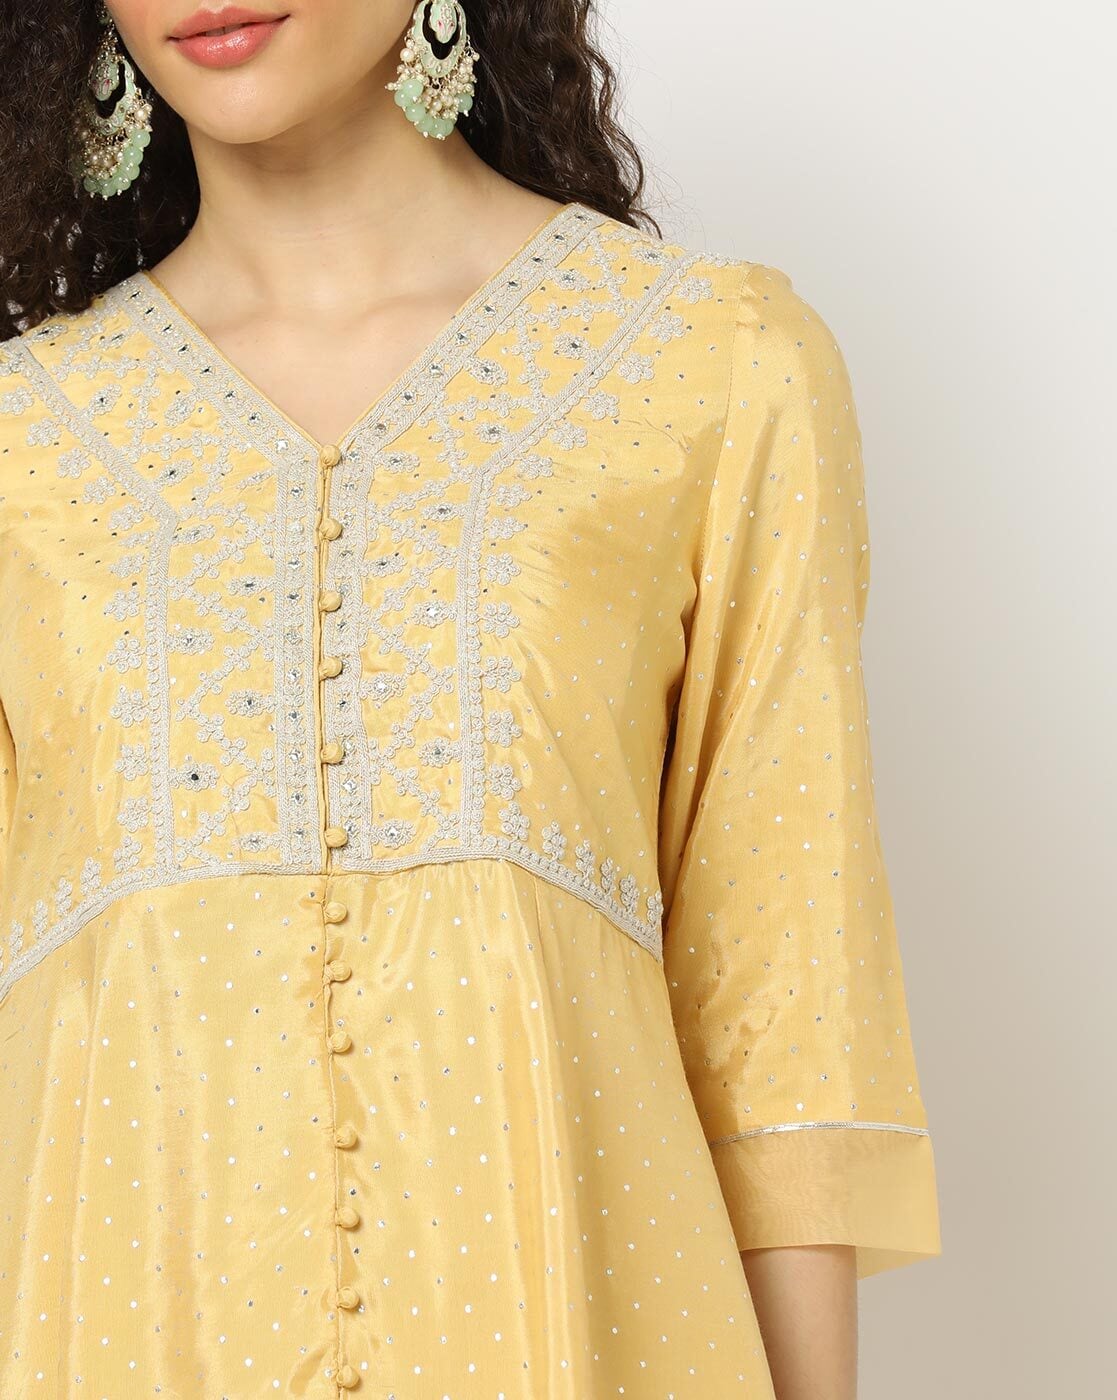 Try These Latest 40 Kurti Back Neck Designs Ideas For 2023 - Tips and Beauty